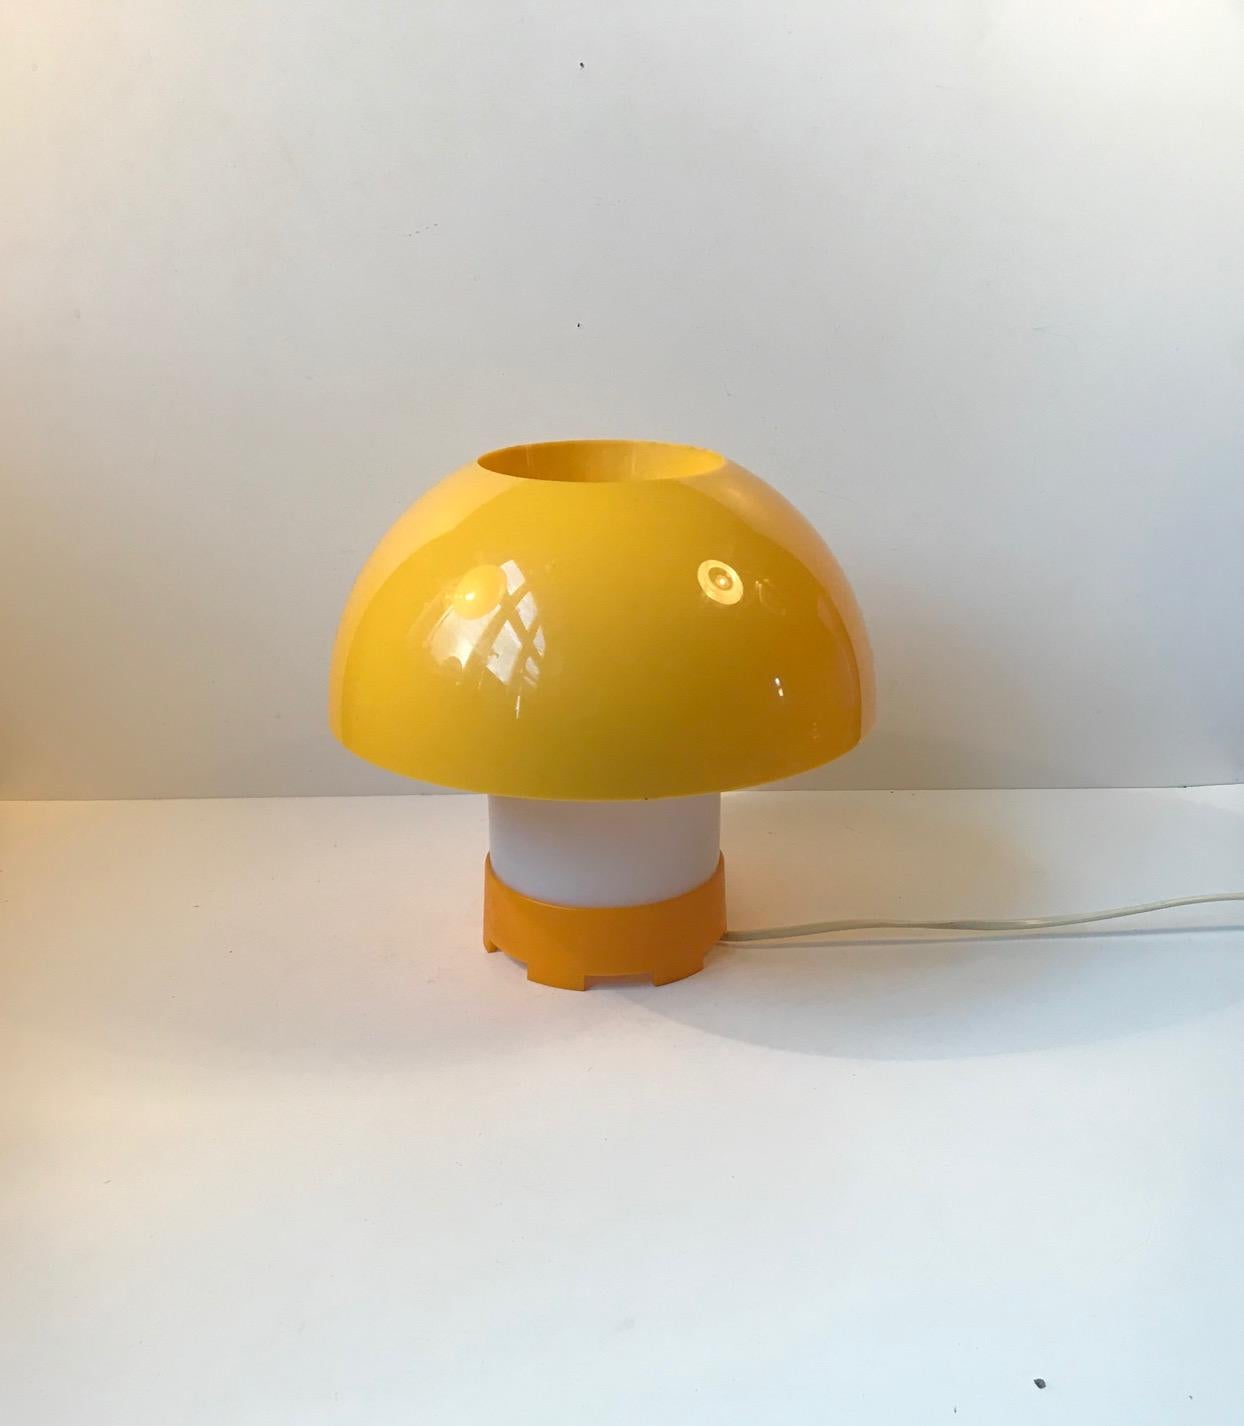 Acrylic Yellow Danish Table or Pendant Lamp by Bent Karlby for ASK Belysninger, 1970s For Sale